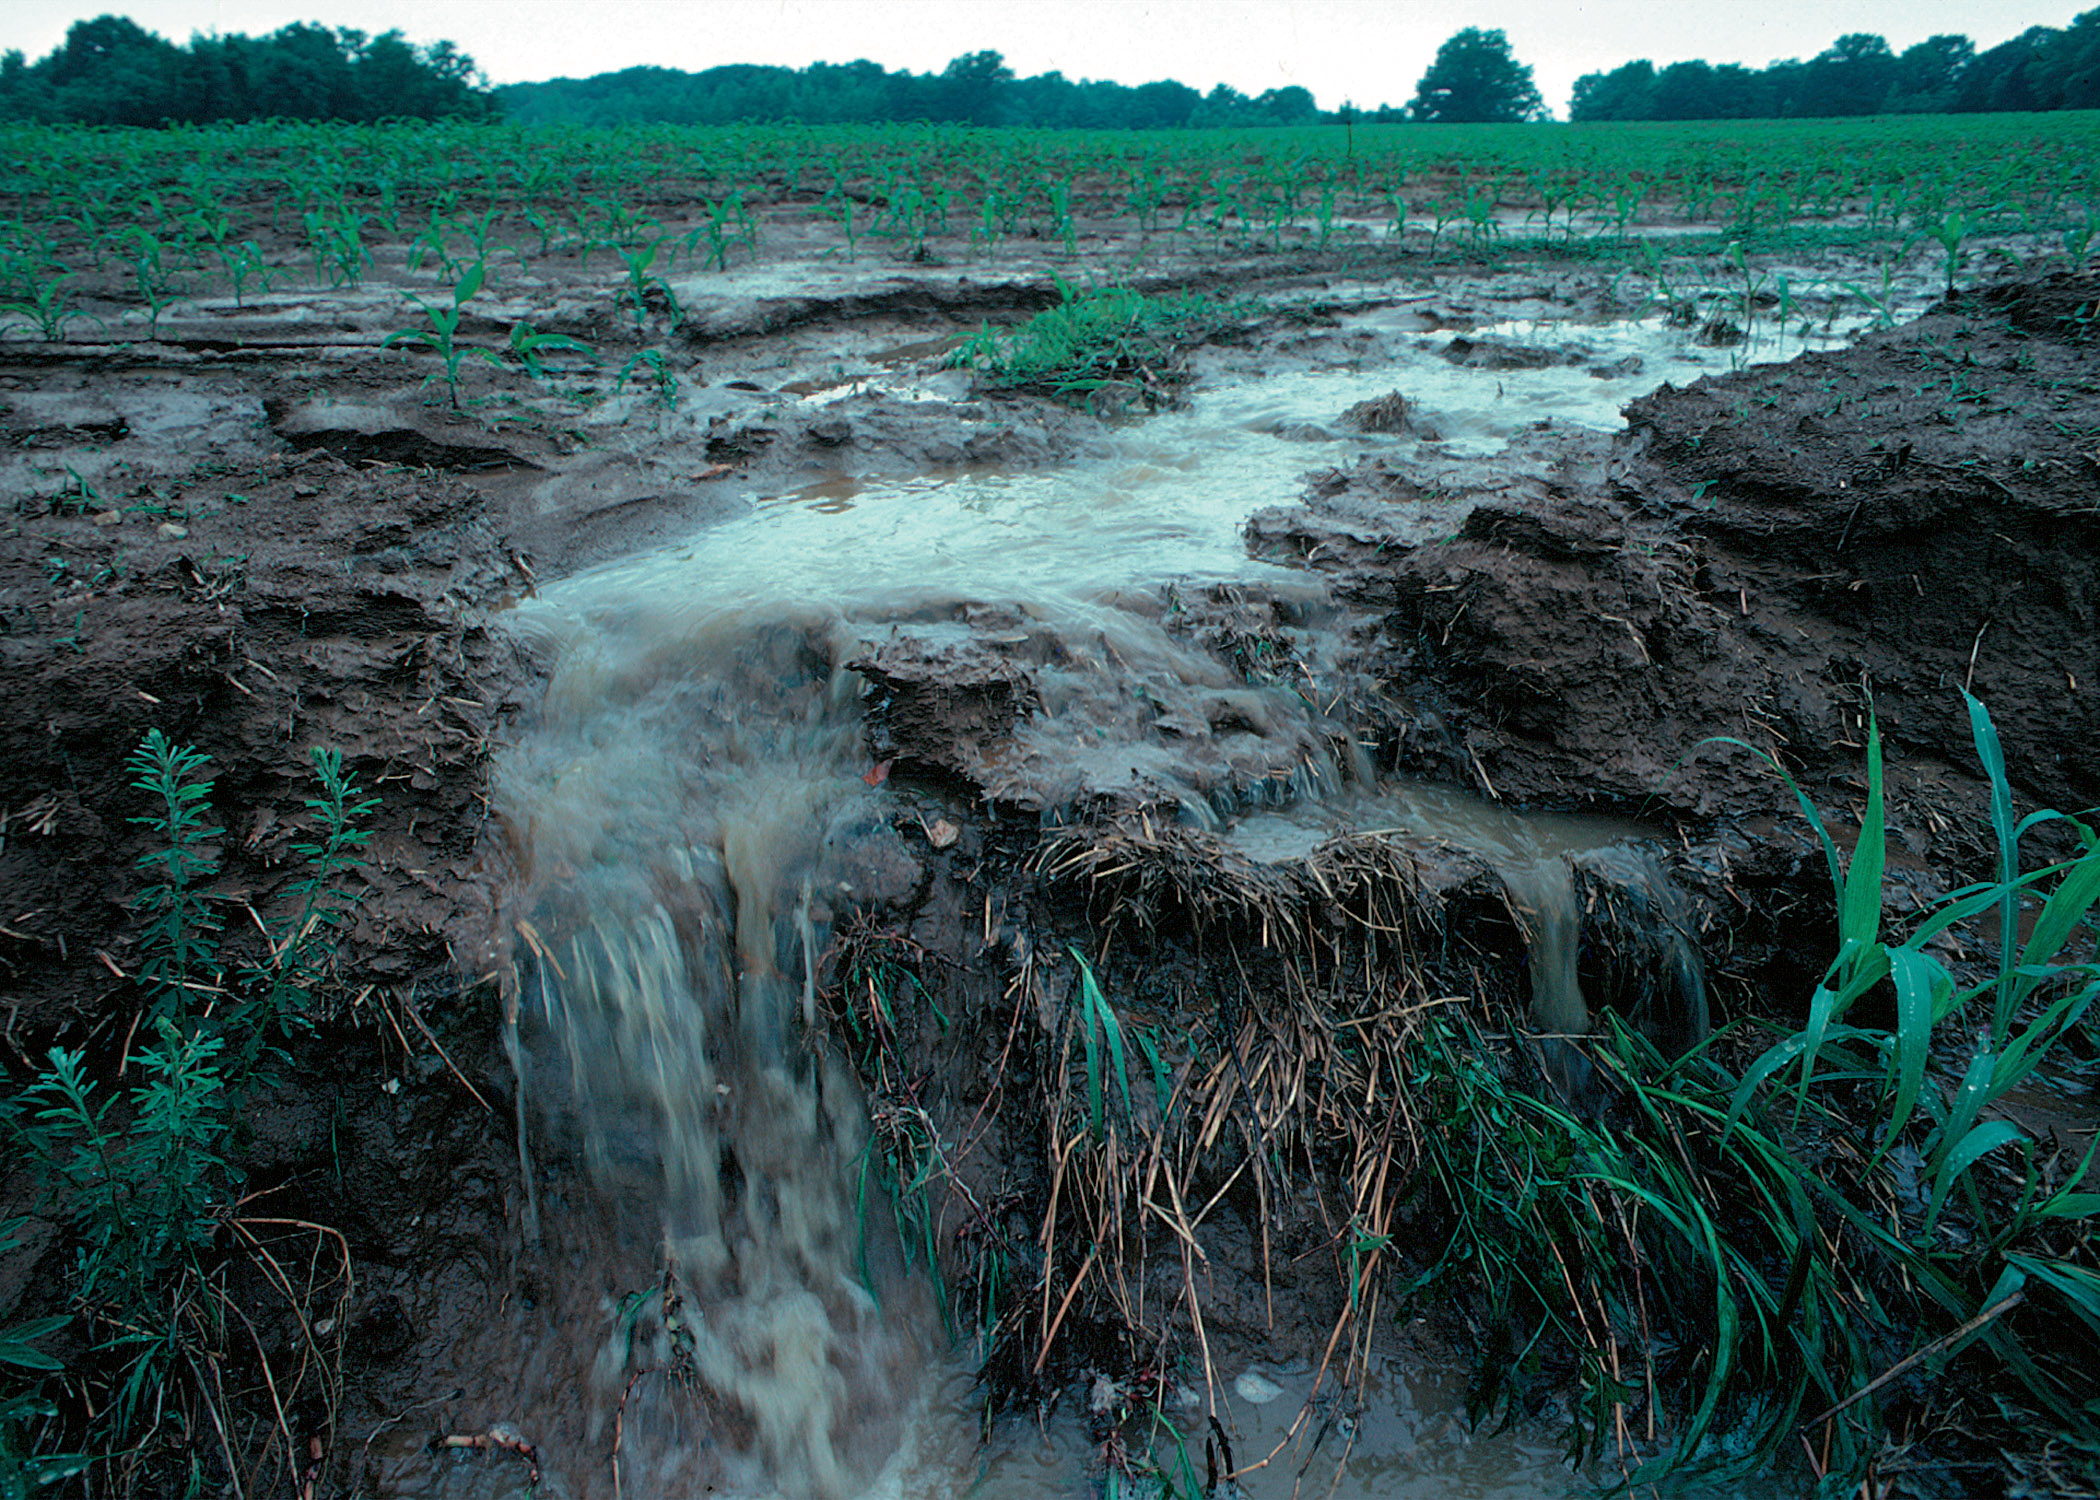 Unprotected farm fields yield topsoil as well as farm fertilizers and other potential pollutants when heavy rains occur.